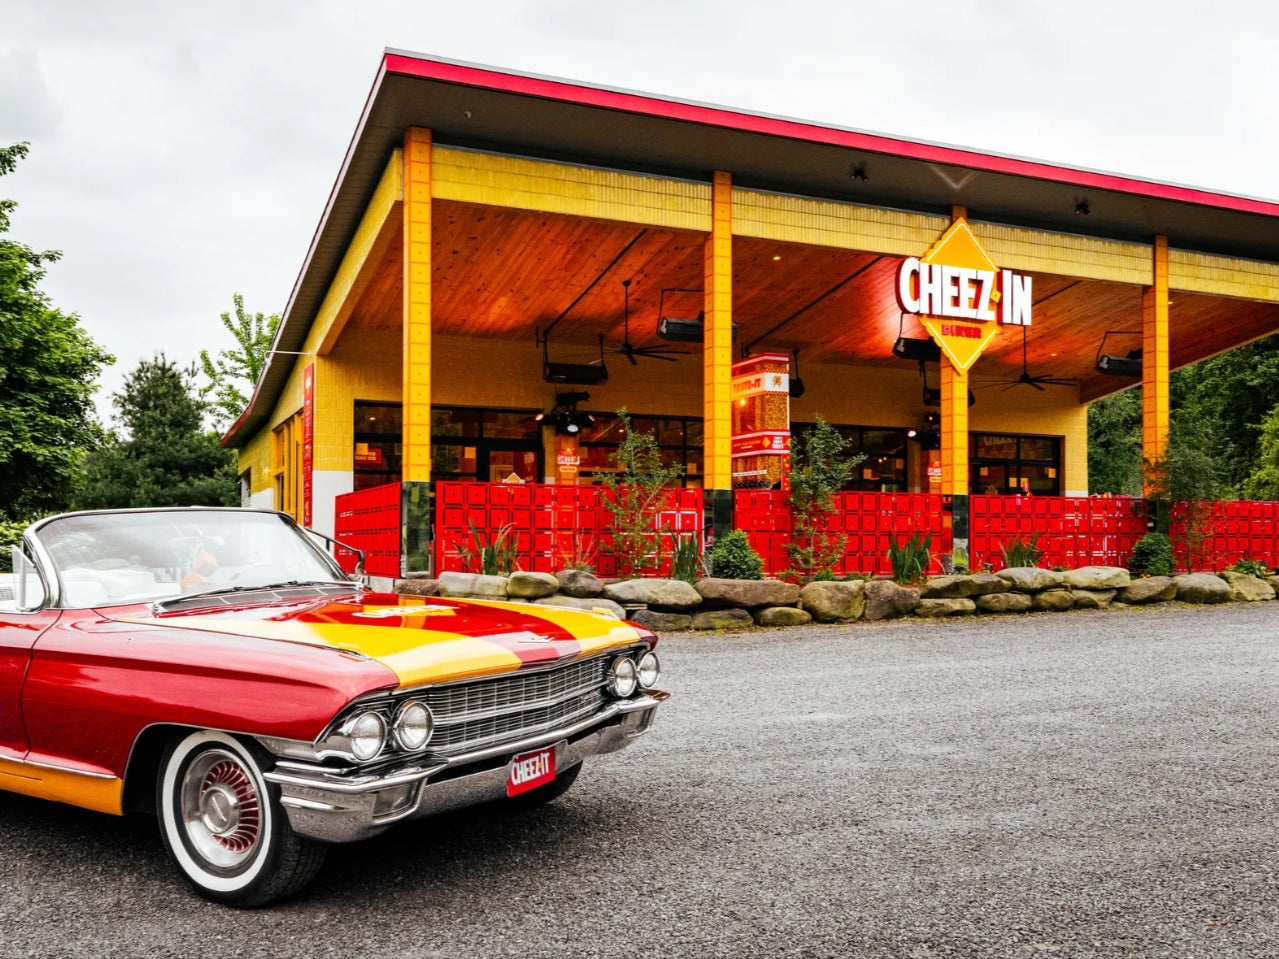 The Cheez-It Diner in Woodstock, New York